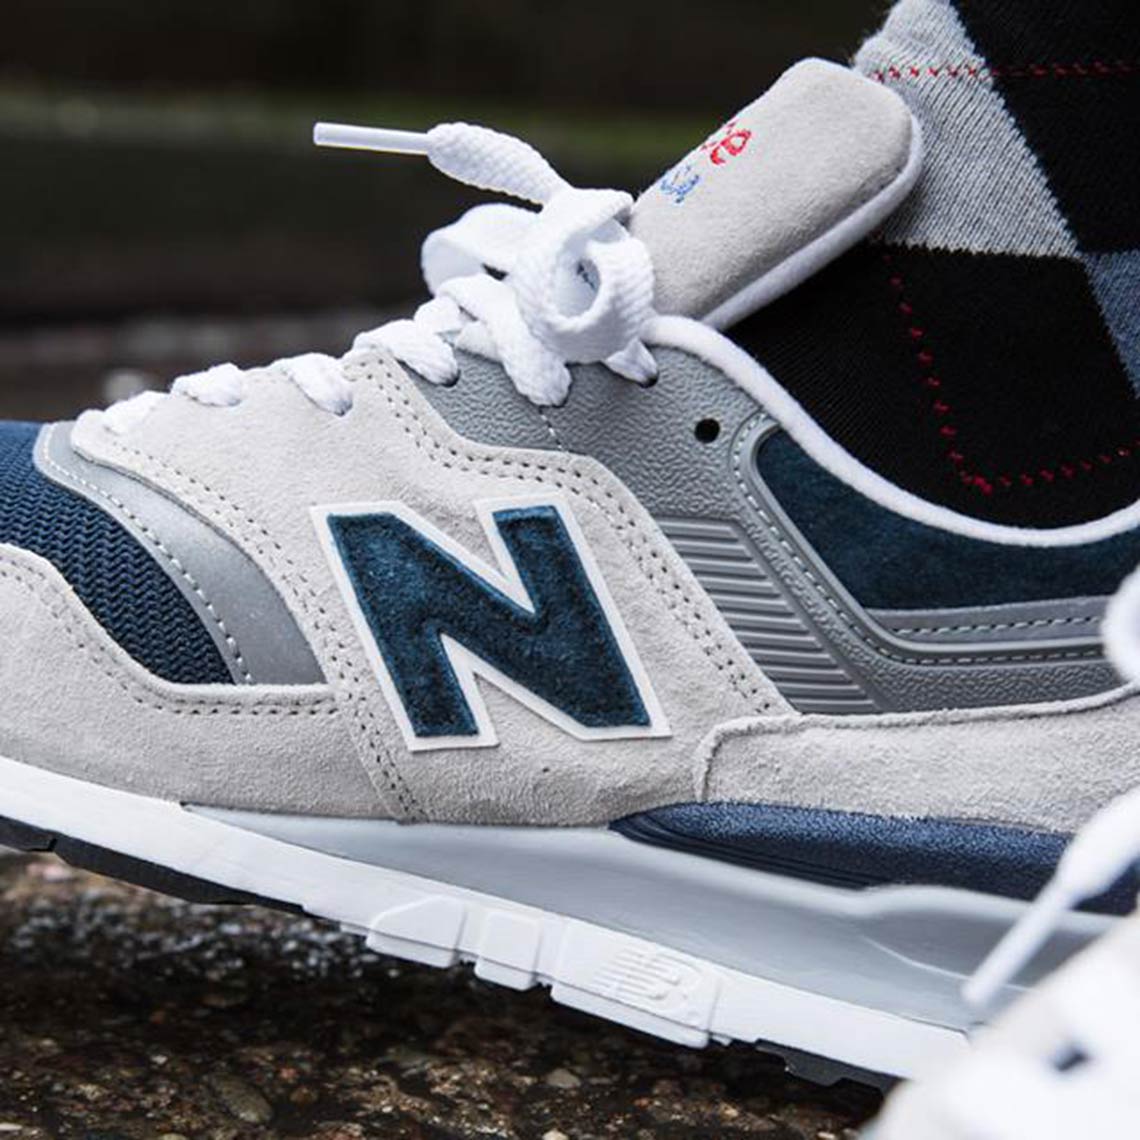 New Balance 997 Made In USA Available Now | SneakerNews.com